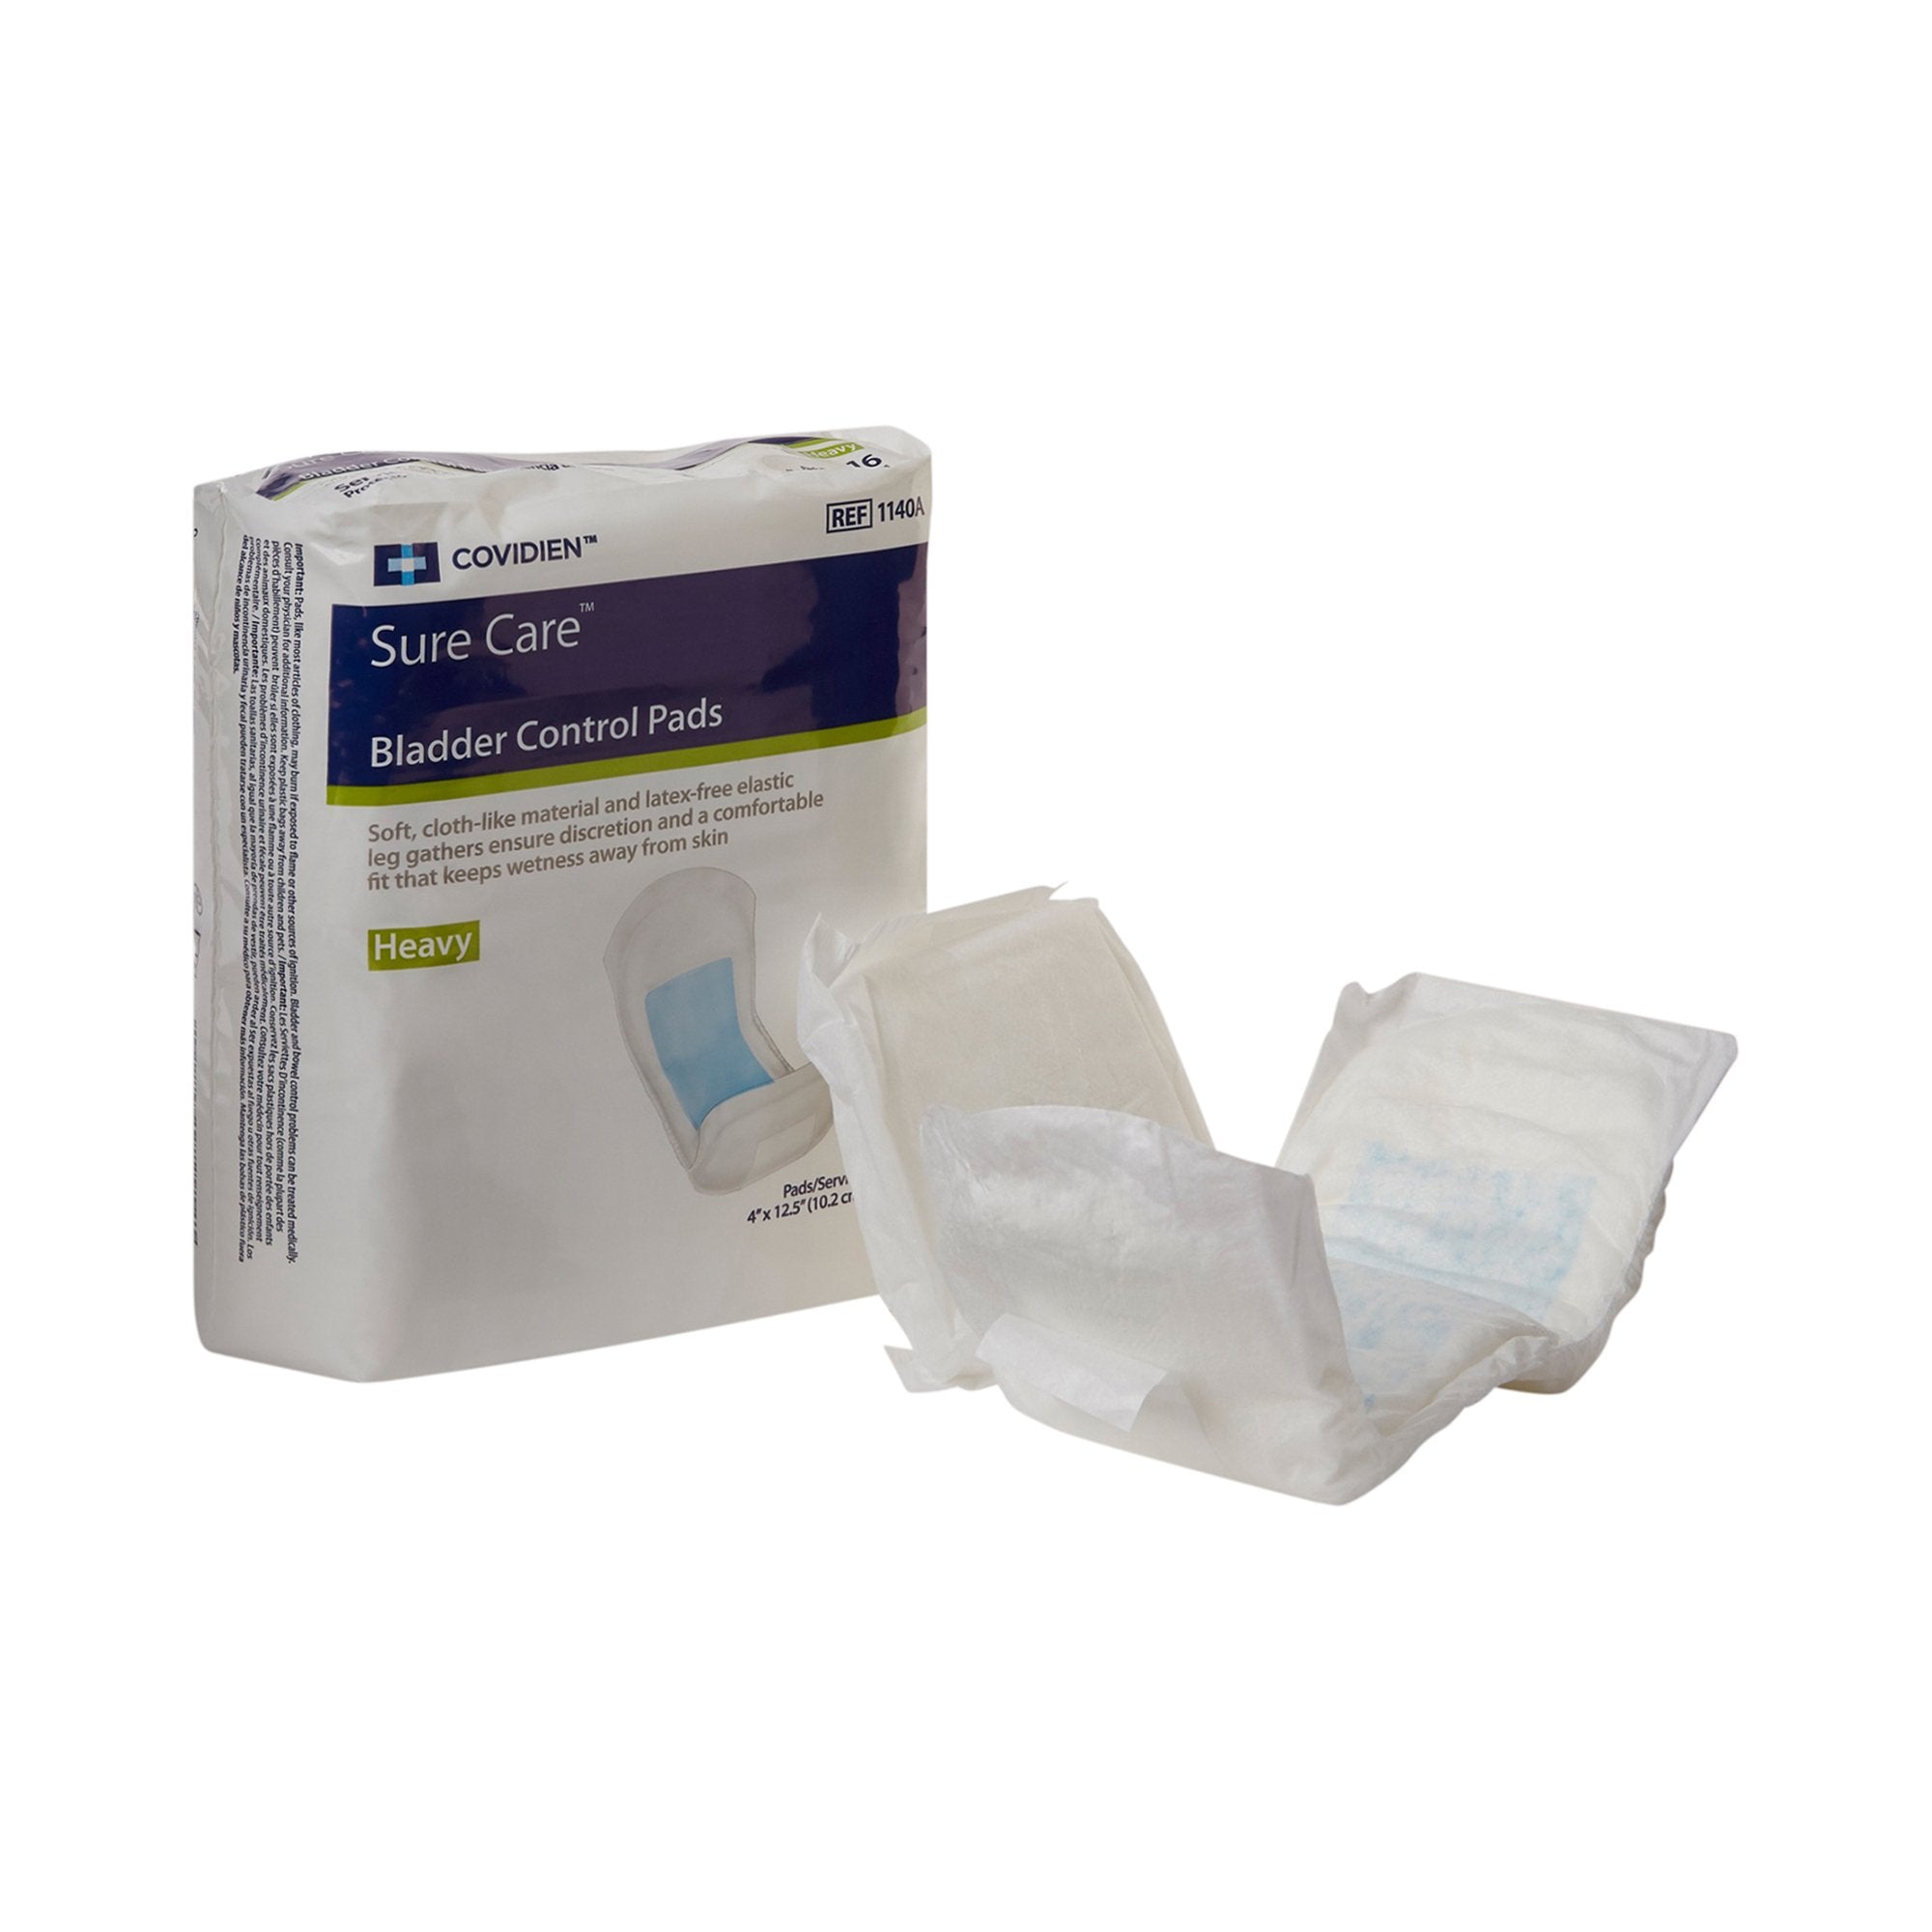 Bladder Control Pad Sure Care 4 X 12-1/2 Inch Heavy Absorbency Polymer Core One Size Fits Most